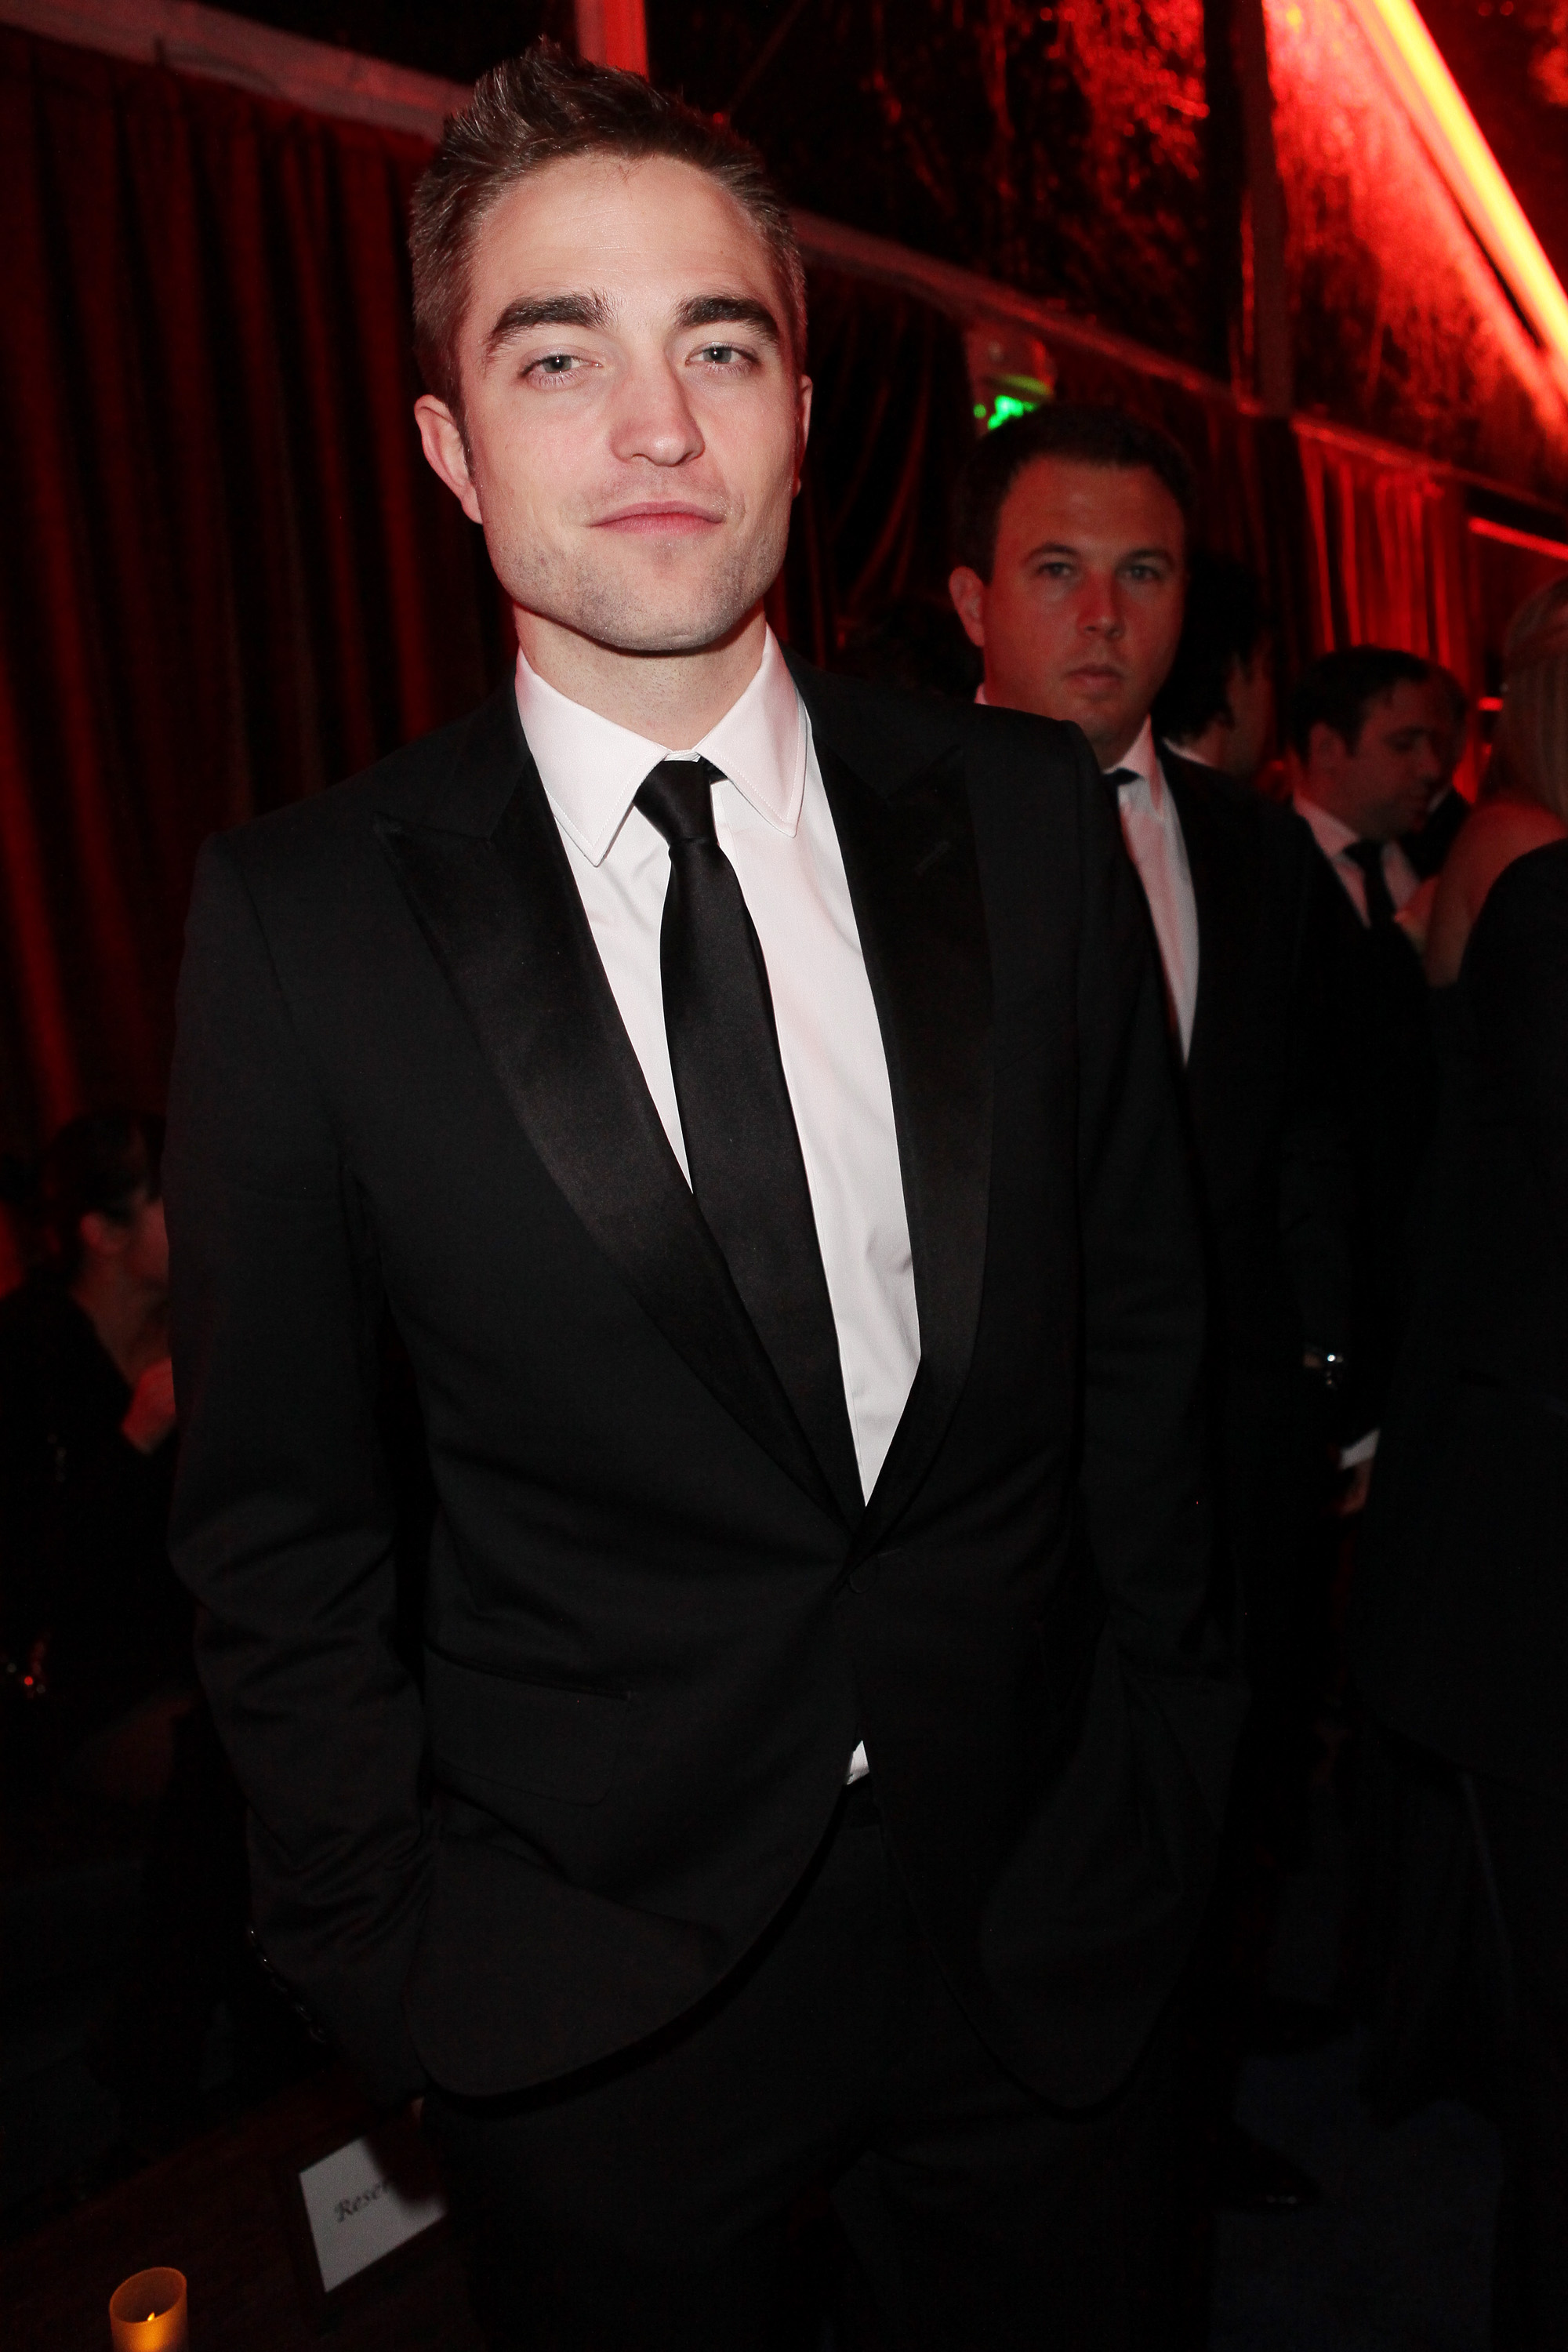 BEVERLY HILLS, CA - JANUARY 13:  Actor Robert Pattinson attends the The Weinstein Company's 2013 Golden Globe Awards after party presented by Chopard, HP, Laura Mercier, Lexus, Marie Claire, and Yucaipa Films held at The Old Trader Vic's at The Beverly Hilton Hotel on January 13, 2013 in Beverly Hills, California.  (Photo by Mike Windle/Getty Images for TWC)